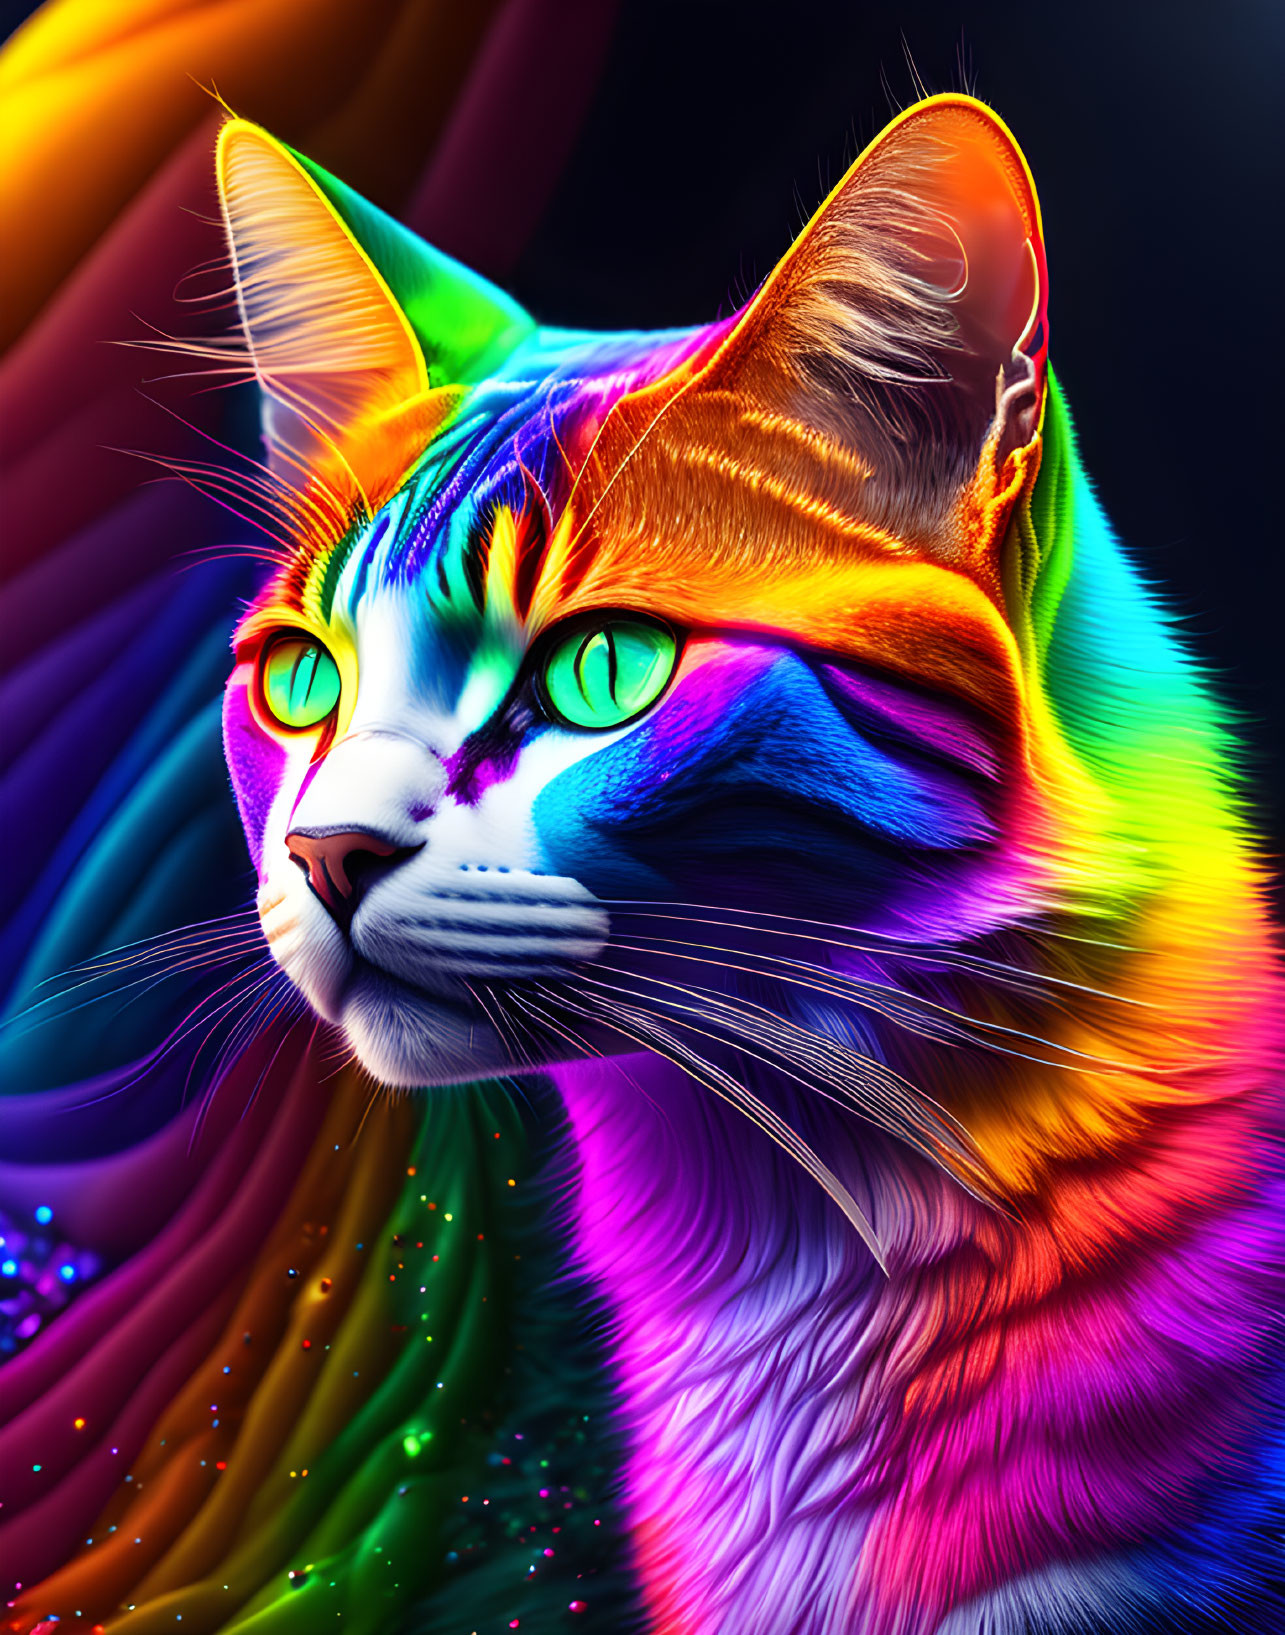 Colorful Digital Artwork: Neon Cat with Swirling Patterns